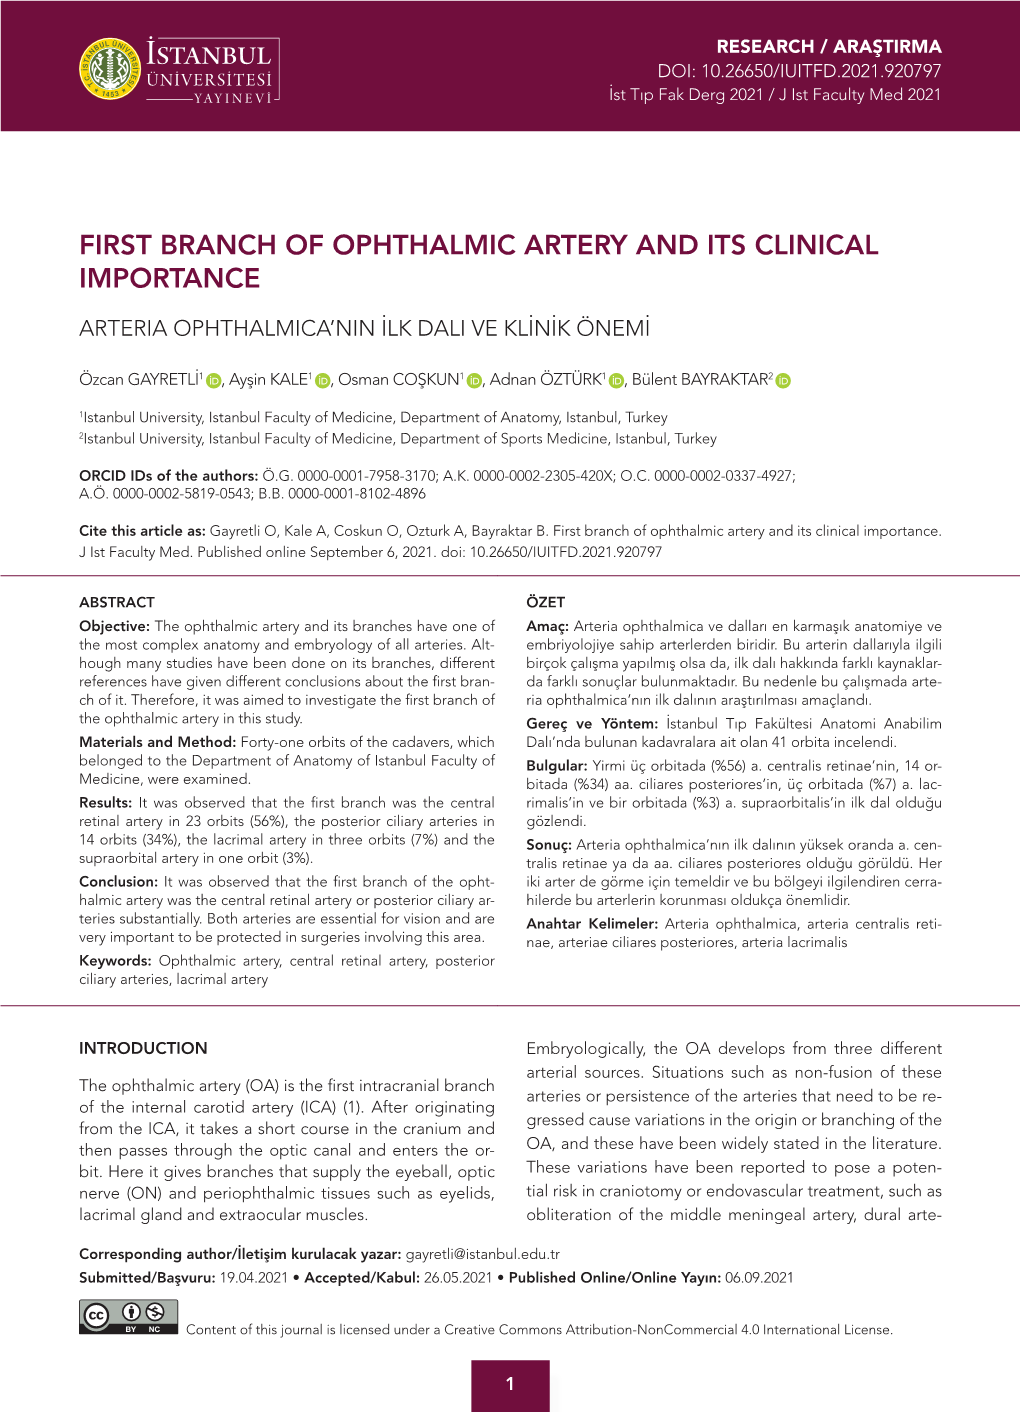 First Branch of Ophthalmic Artery and Its Clinical Importance